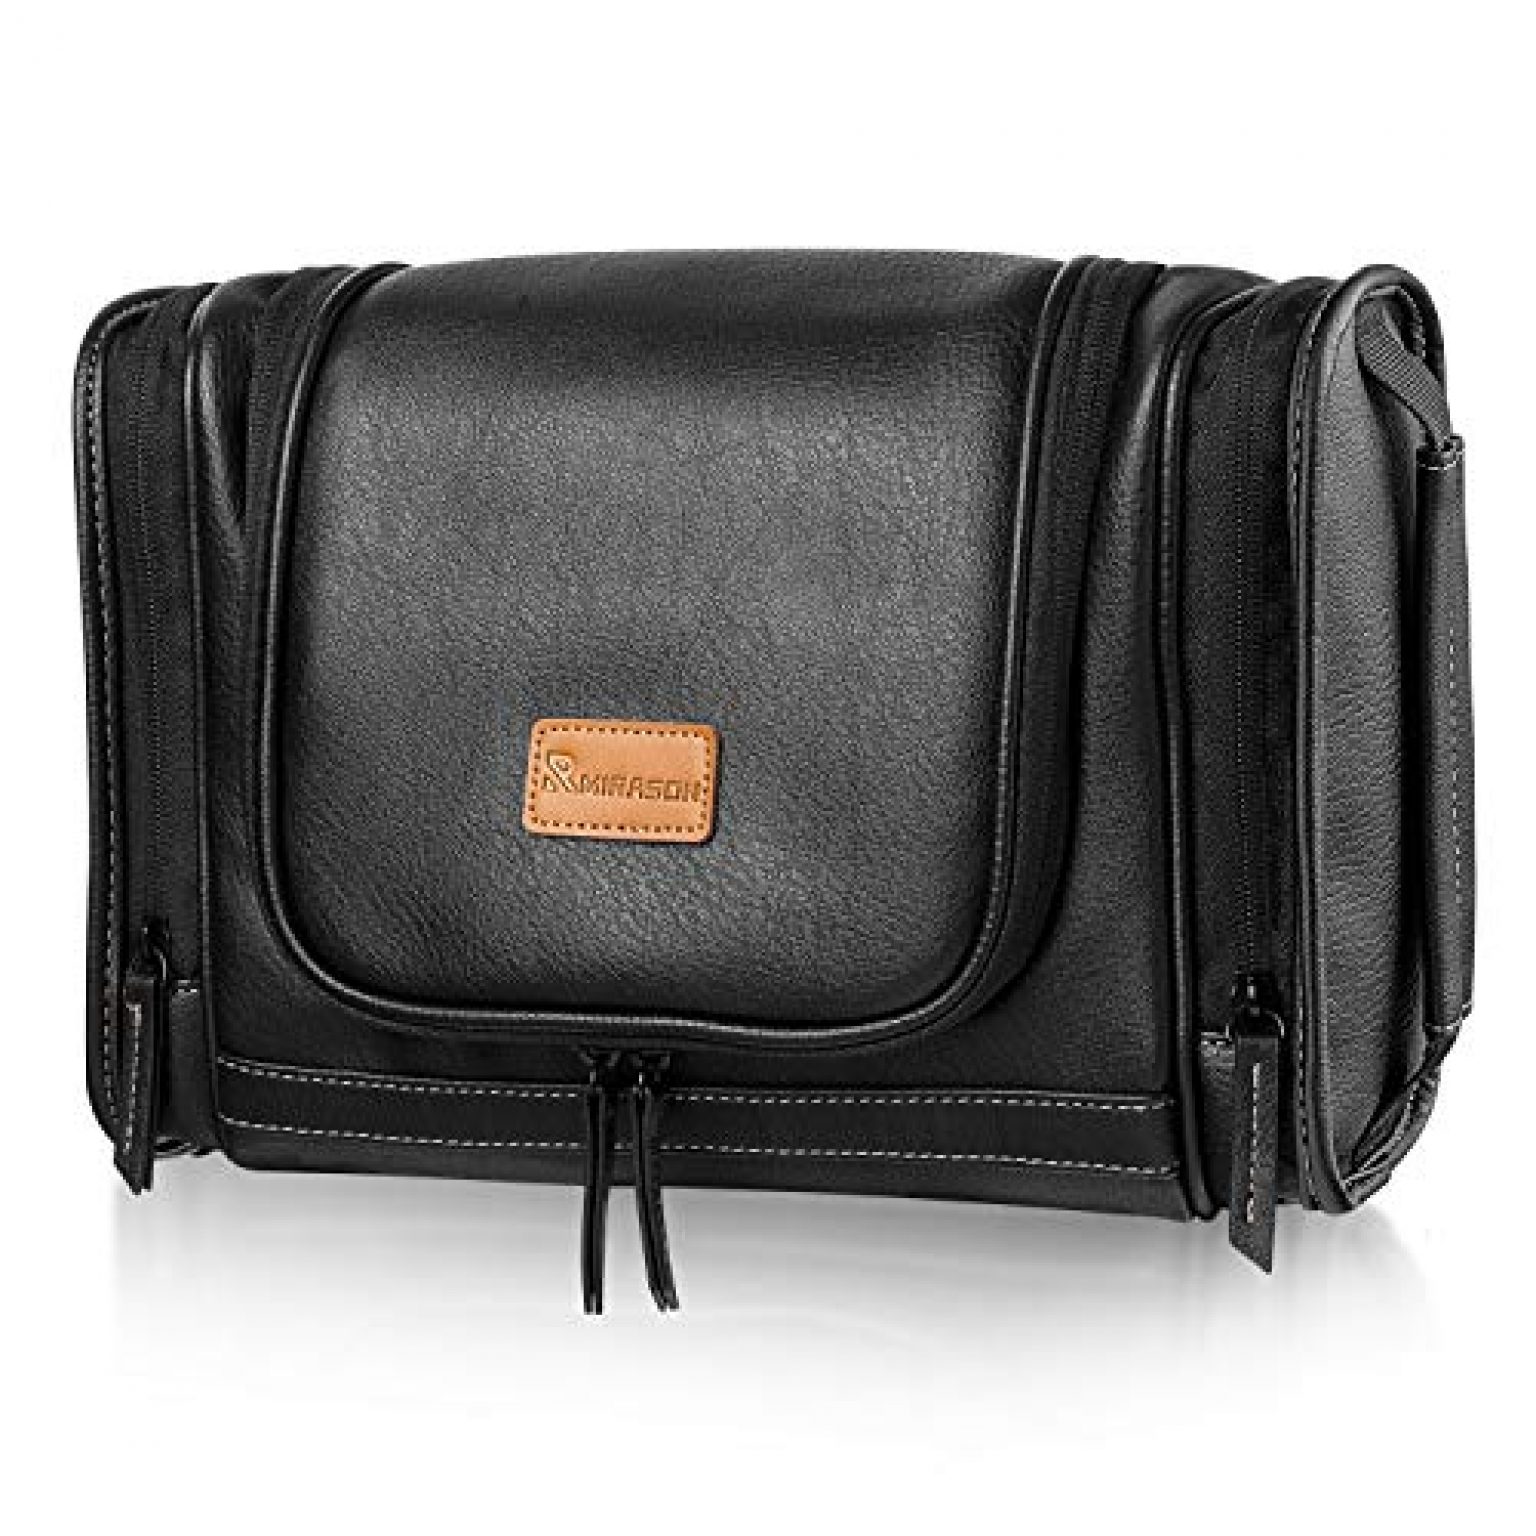 leather hanging travel toiletry bag